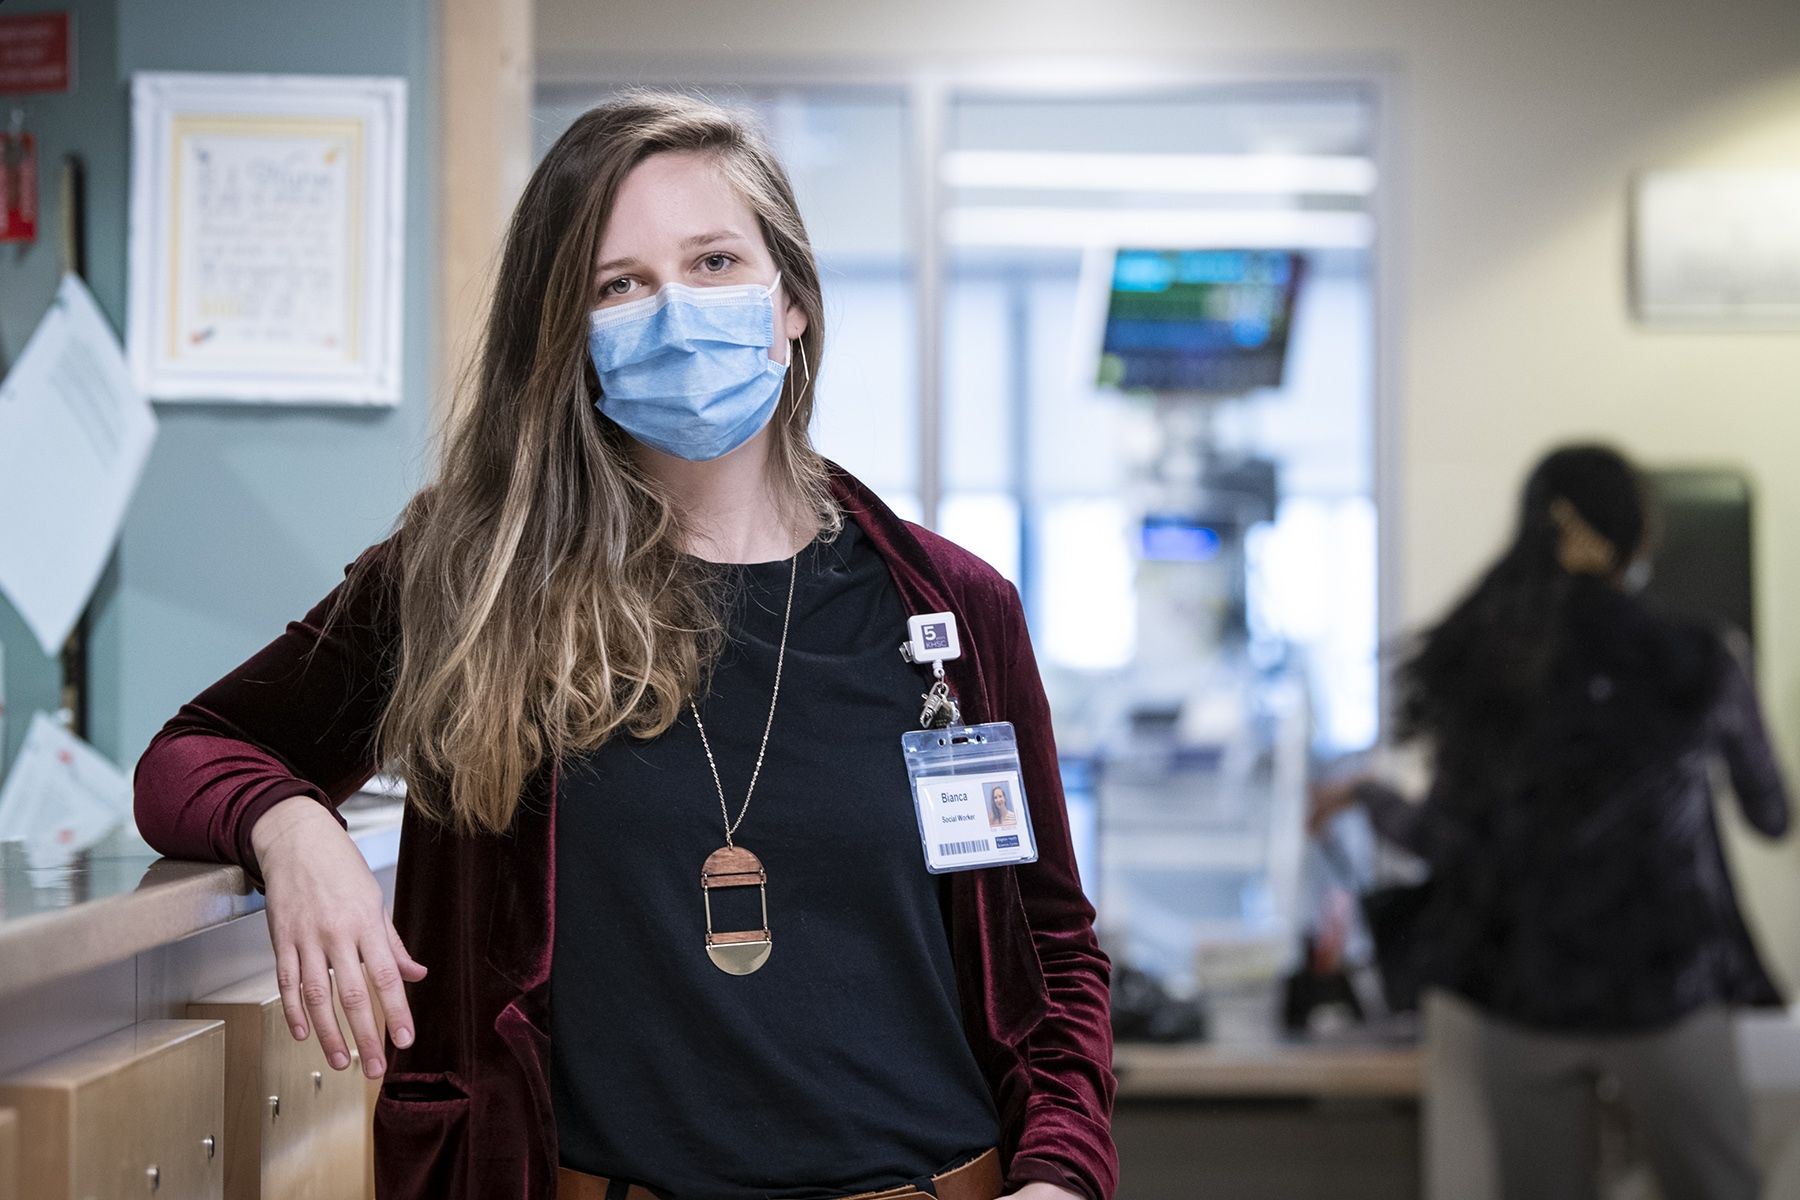 Bianca Sabatini is pictured leaning on the care desk at the Intensive Care Unit (ICU) at the KGH site. She has blue eyes and medium brown, wavy hair that goes down past her shoulders. She’s wearing a black top with a burgundy blazer on top. 